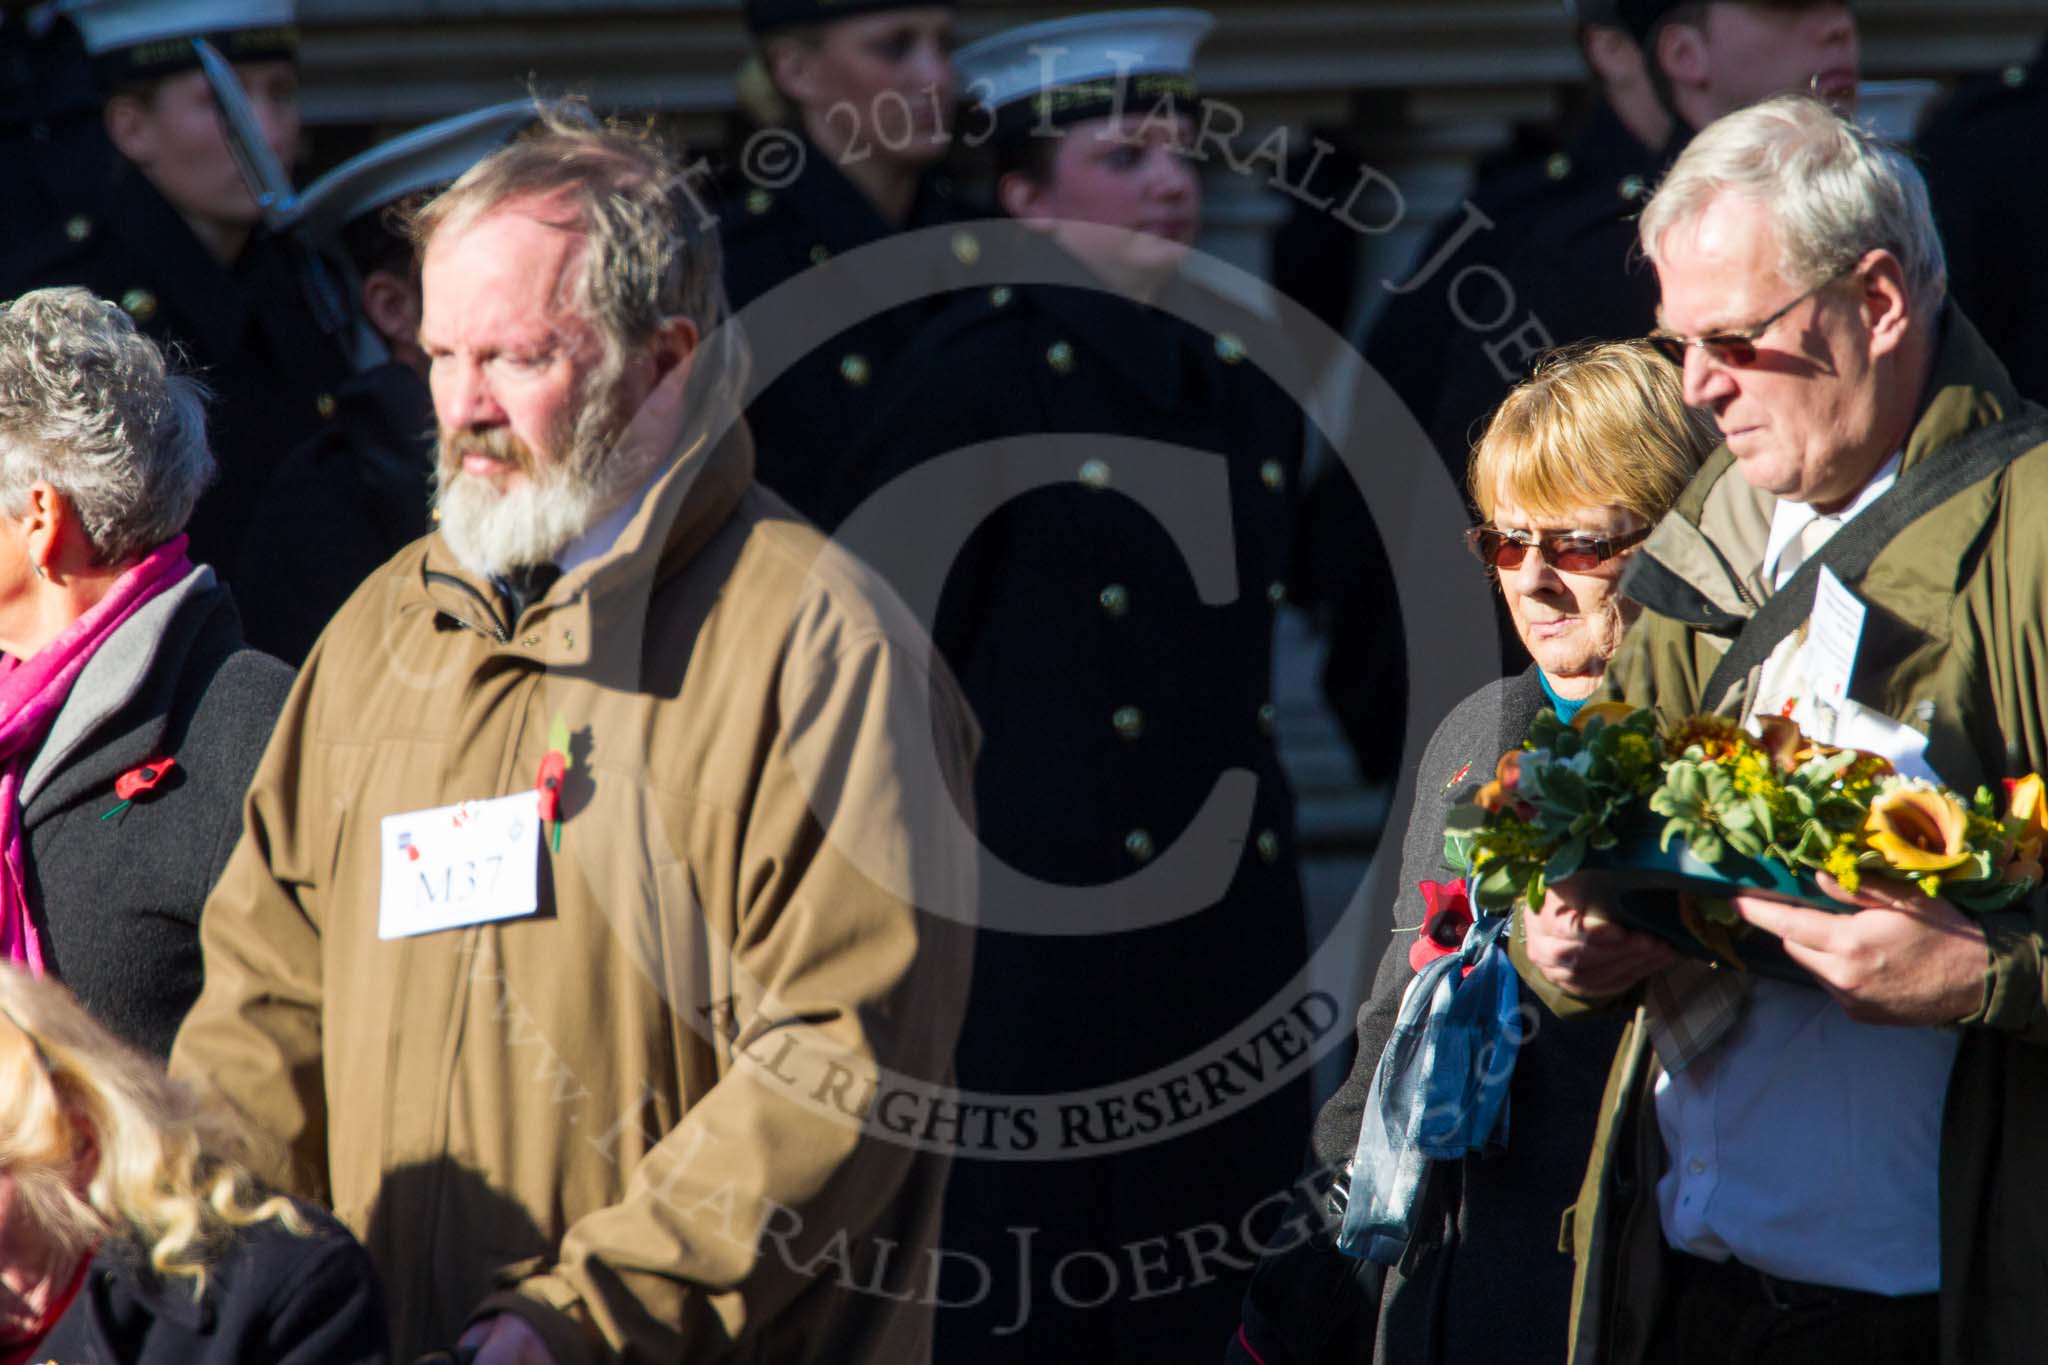 Remembrance Sunday at the Cenotaph in London 2014: Group M37 - Shot at Dawn Pardons Campaign.
Press stand opposite the Foreign Office building, Whitehall, London SW1,
London,
Greater London,
United Kingdom,
on 09 November 2014 at 12:19, image #2270